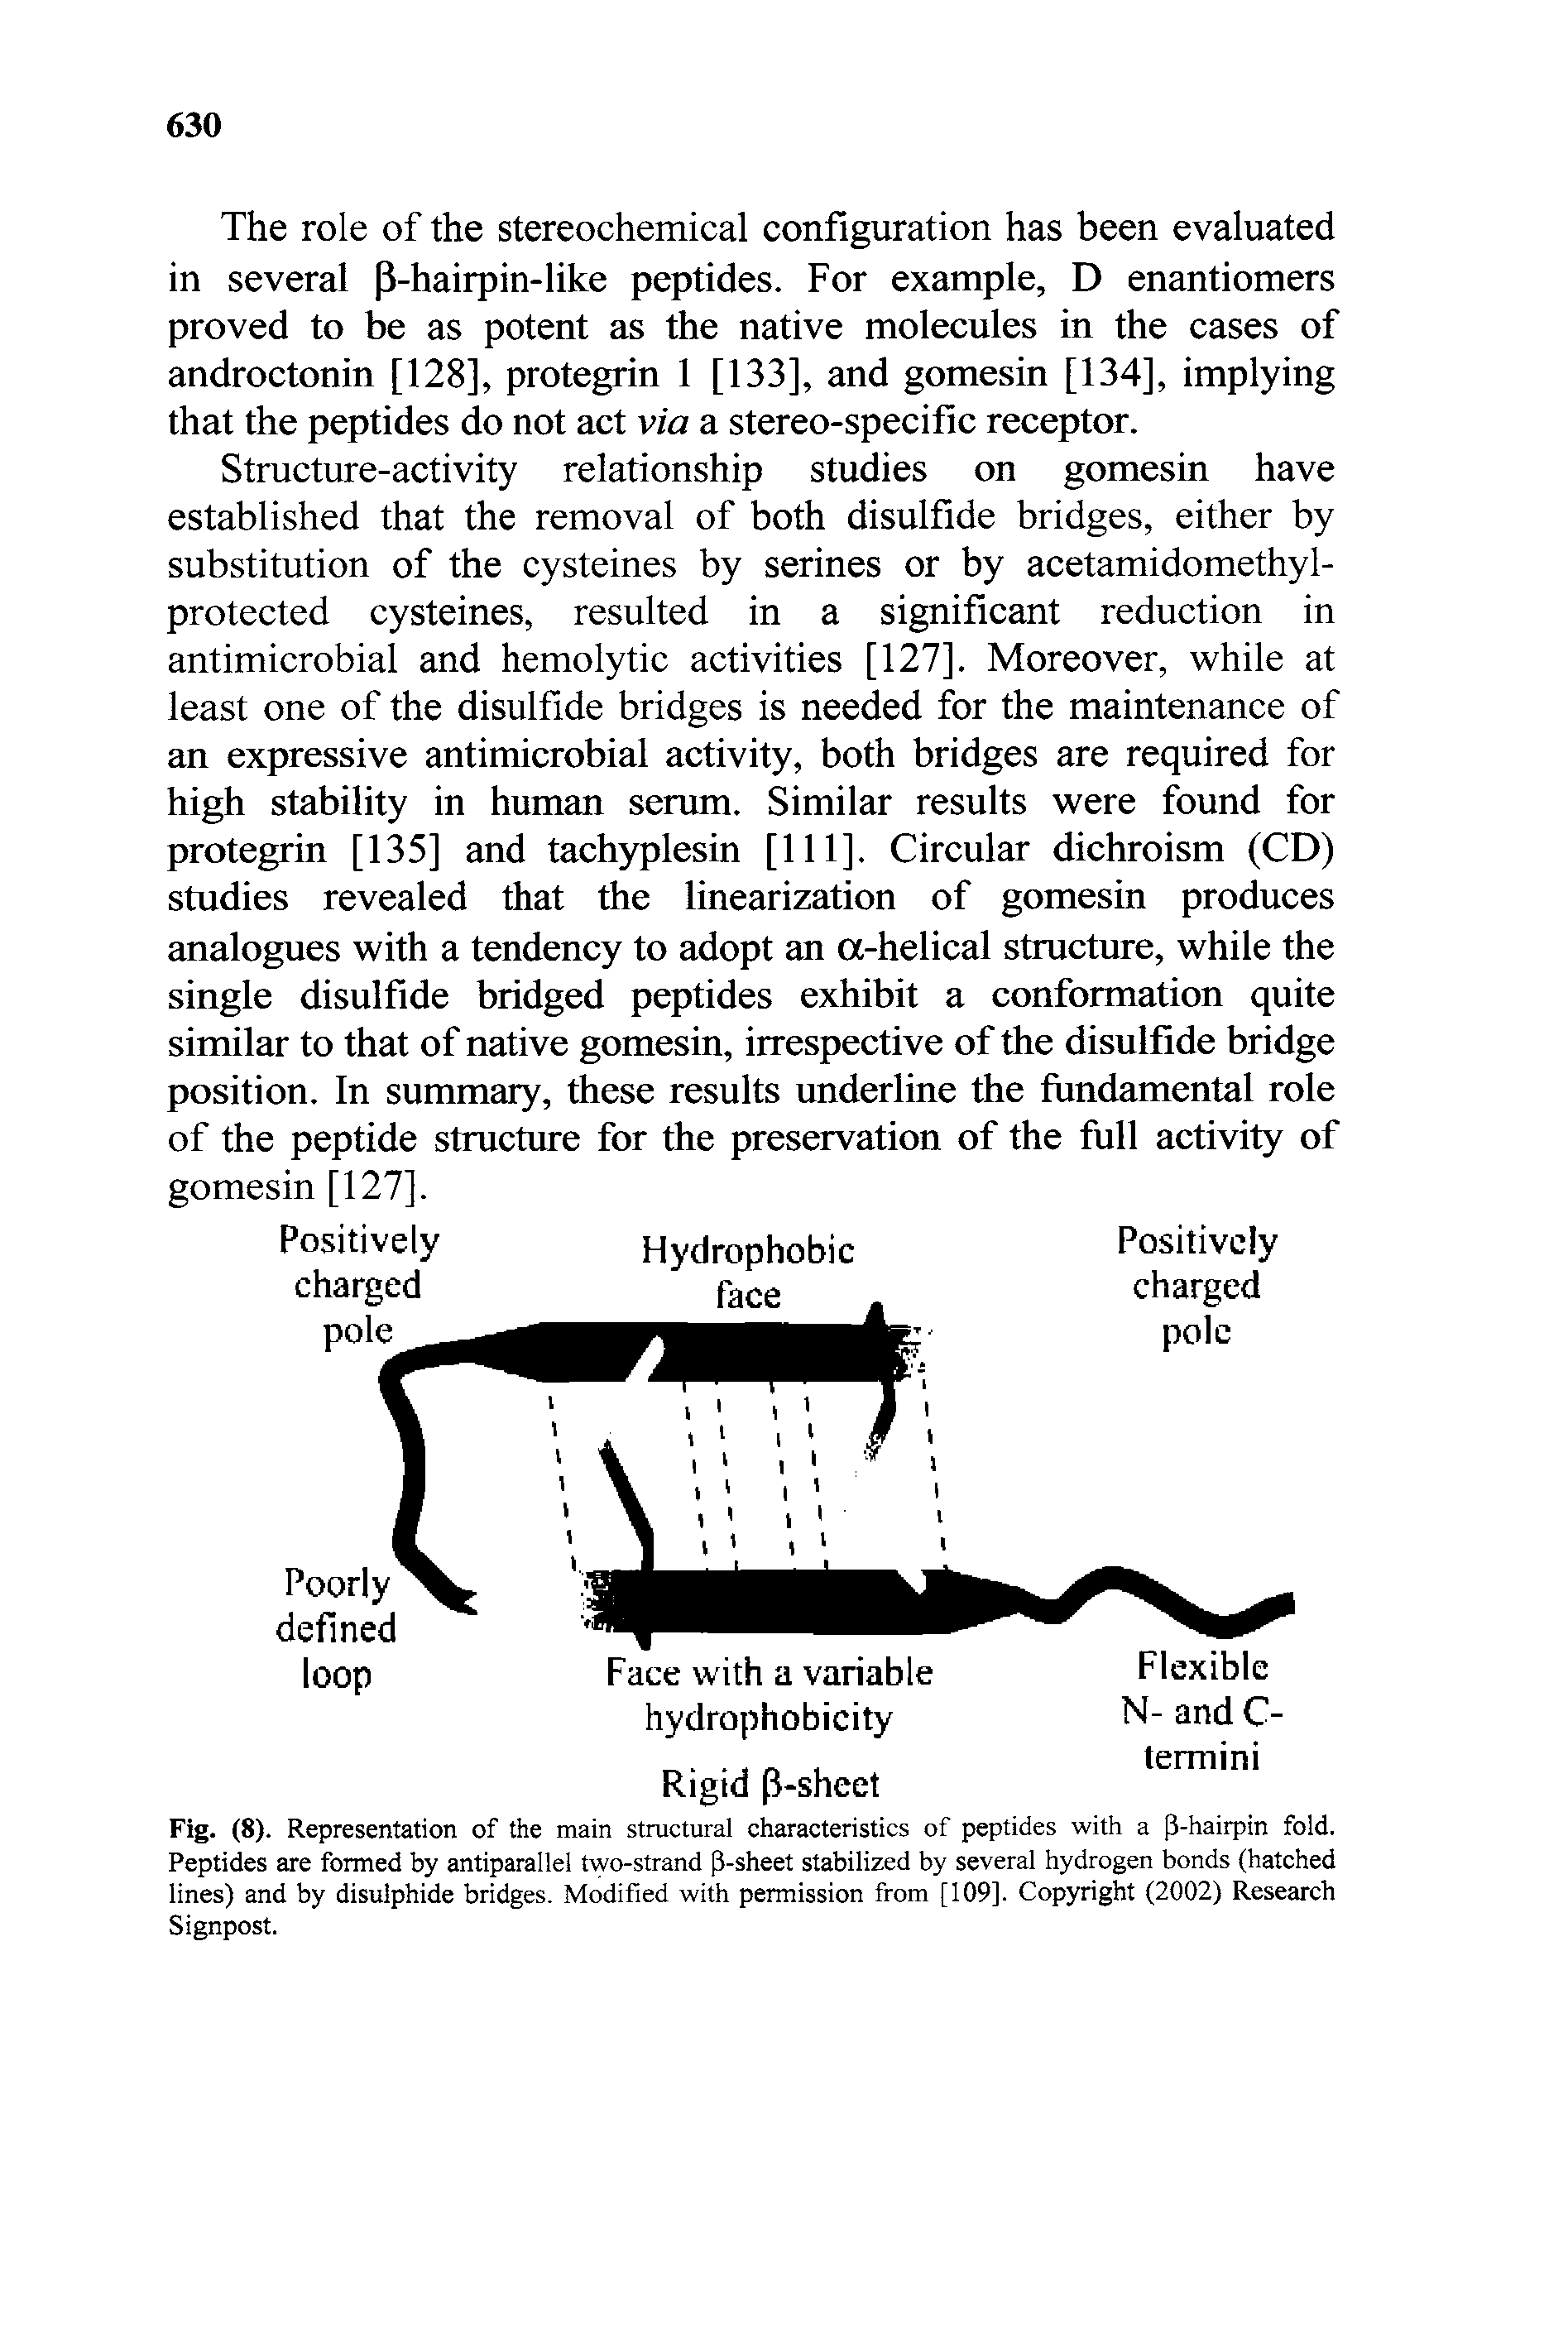 Fig. (8). Representation of the main structural characteristics of peptides with a p-hairpin fold. Peptides are formed by antiparallel two-strand P-sheet stabilized by several hydrogen bonds (hatched lines) and by disulphide bridges. Modified with permission from [109]. Copyright (2002) Research Signpost.